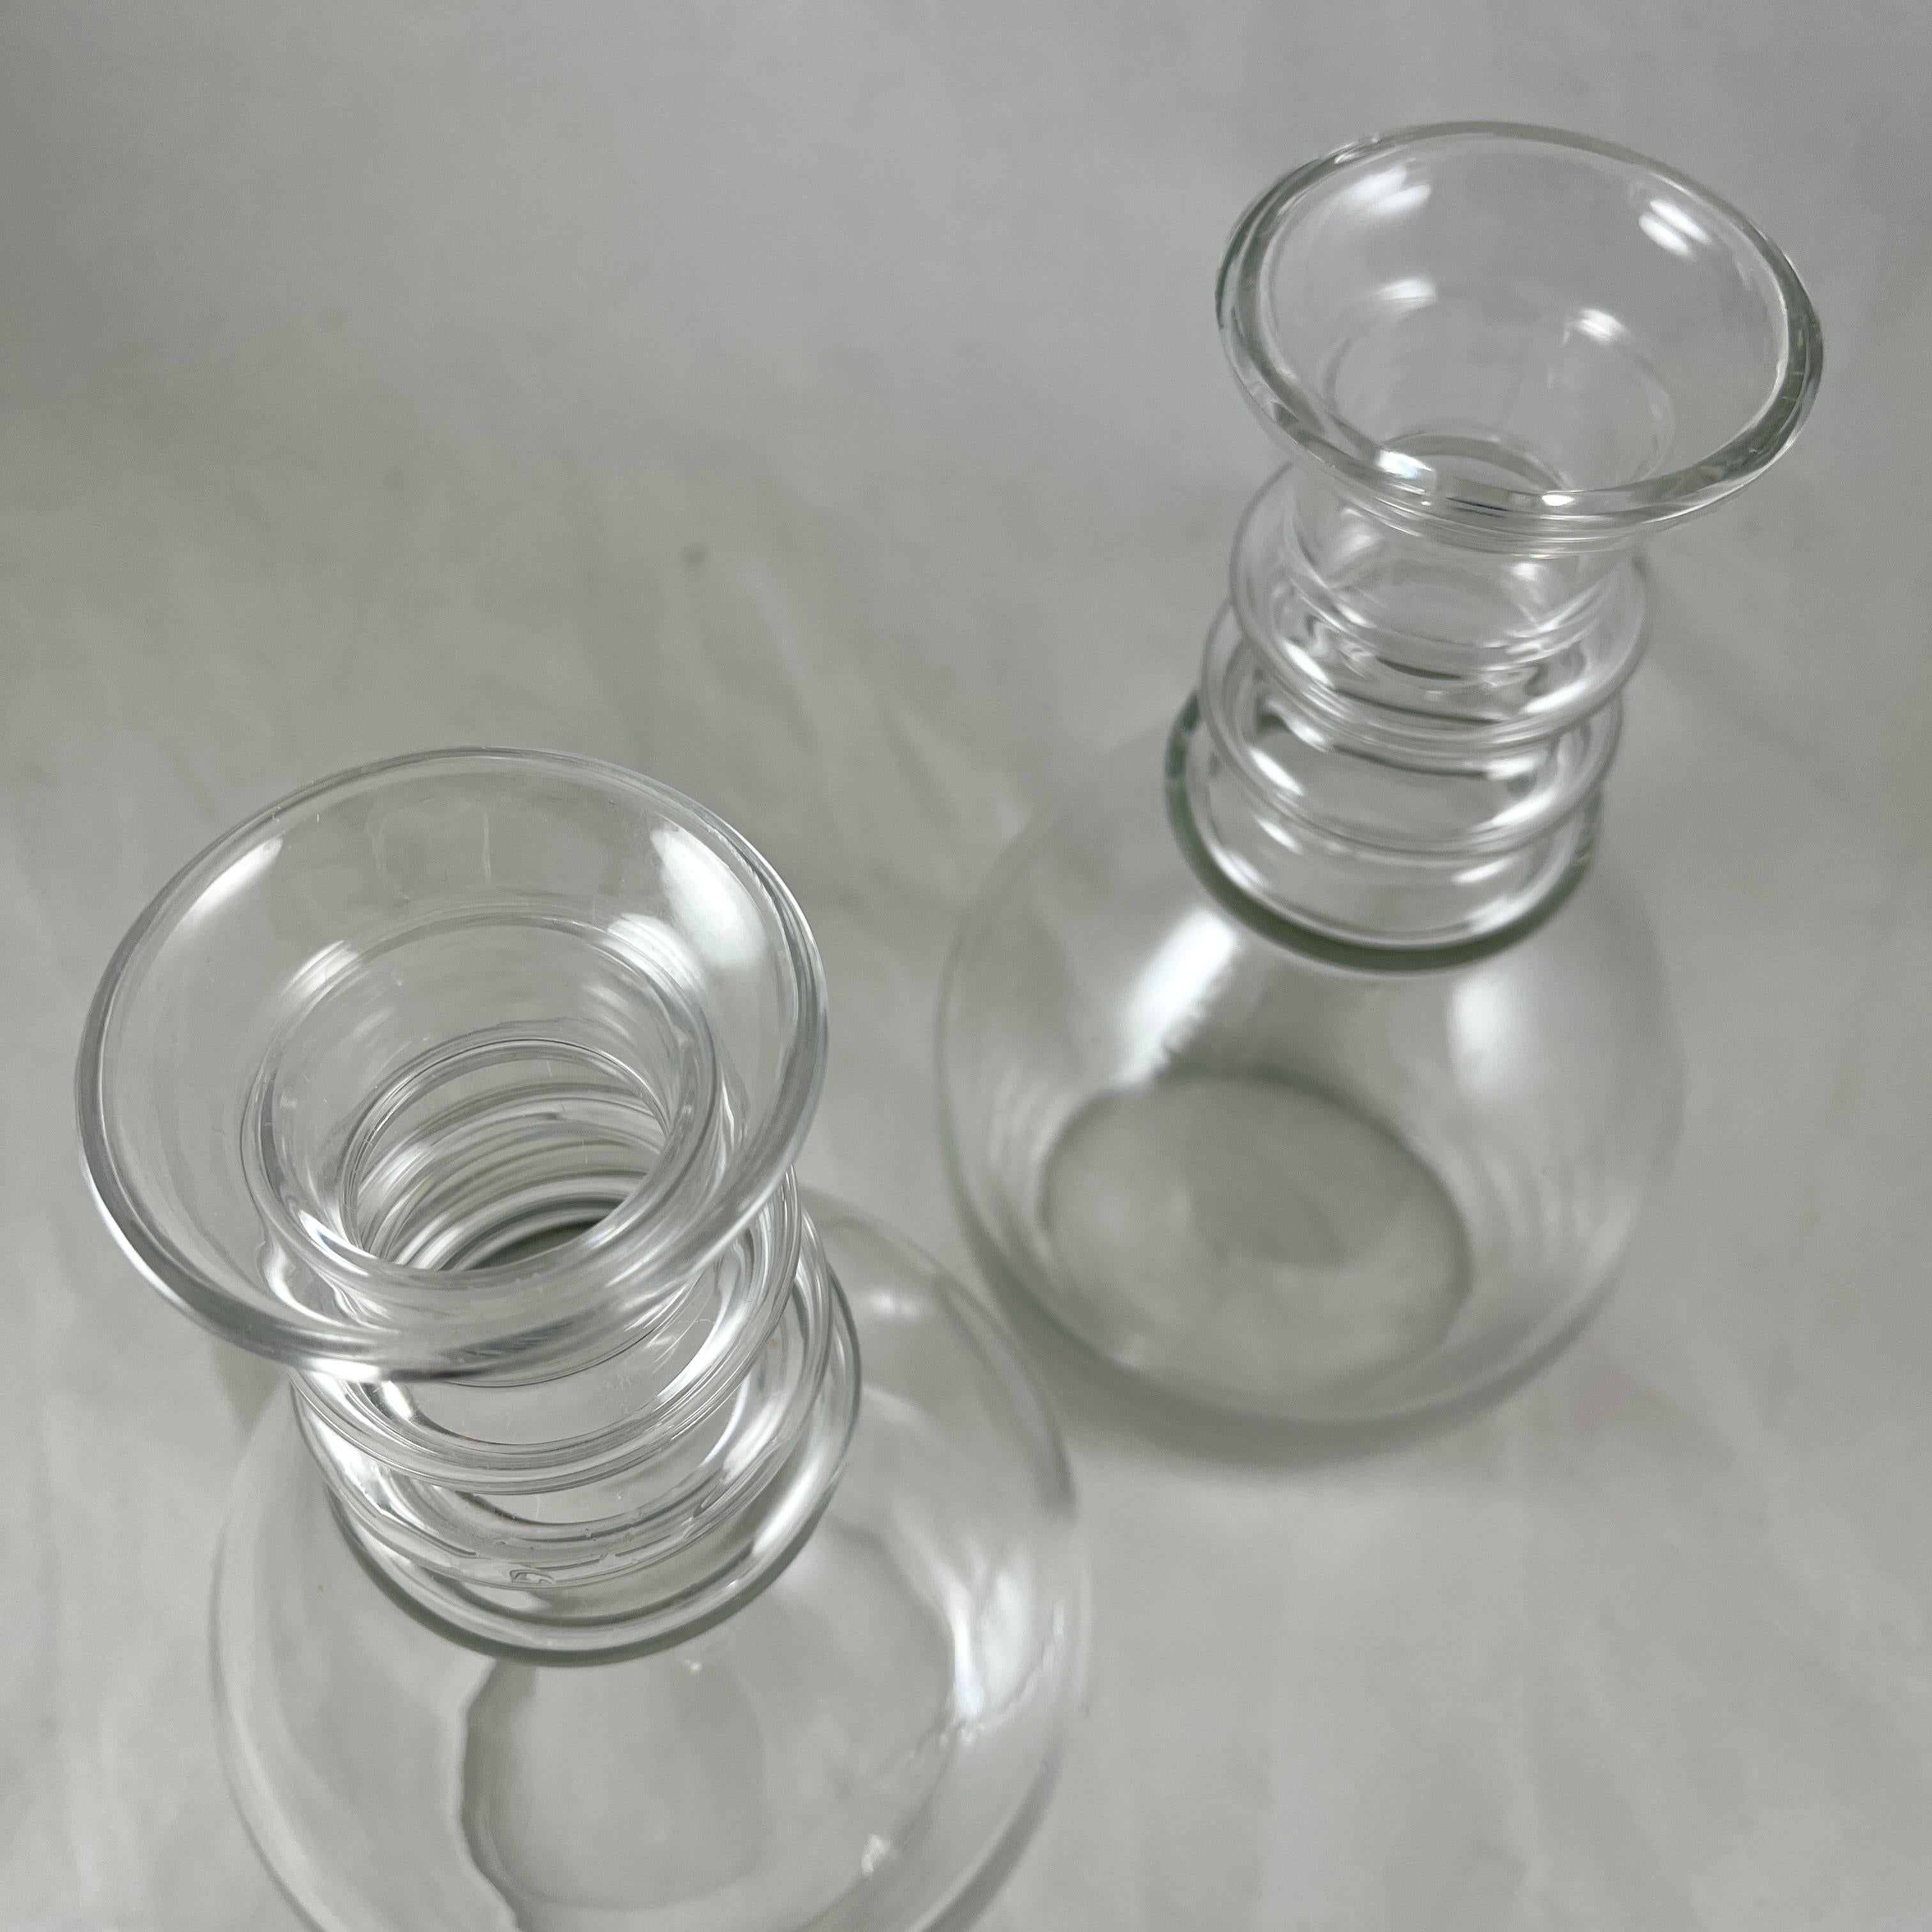 Midcentury Val Saint Lambert Blown Glass Decanters, a Pair In Good Condition For Sale In Philadelphia, PA